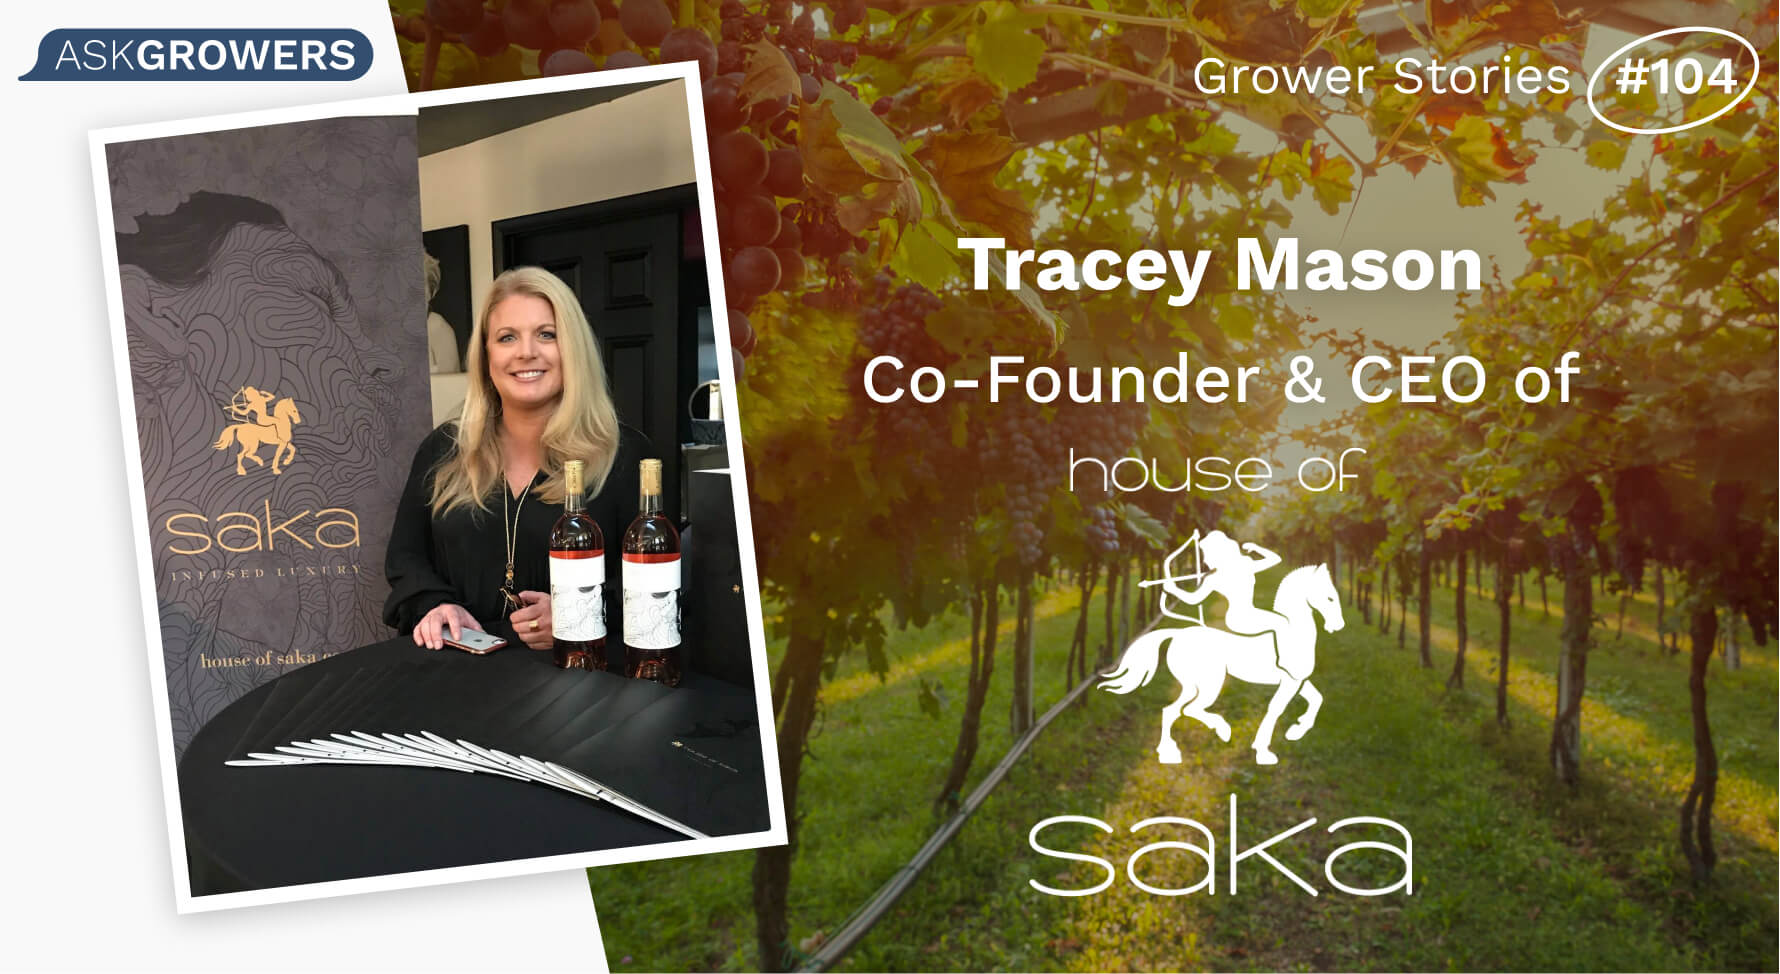 Grower Stories #104: Tracey Mason